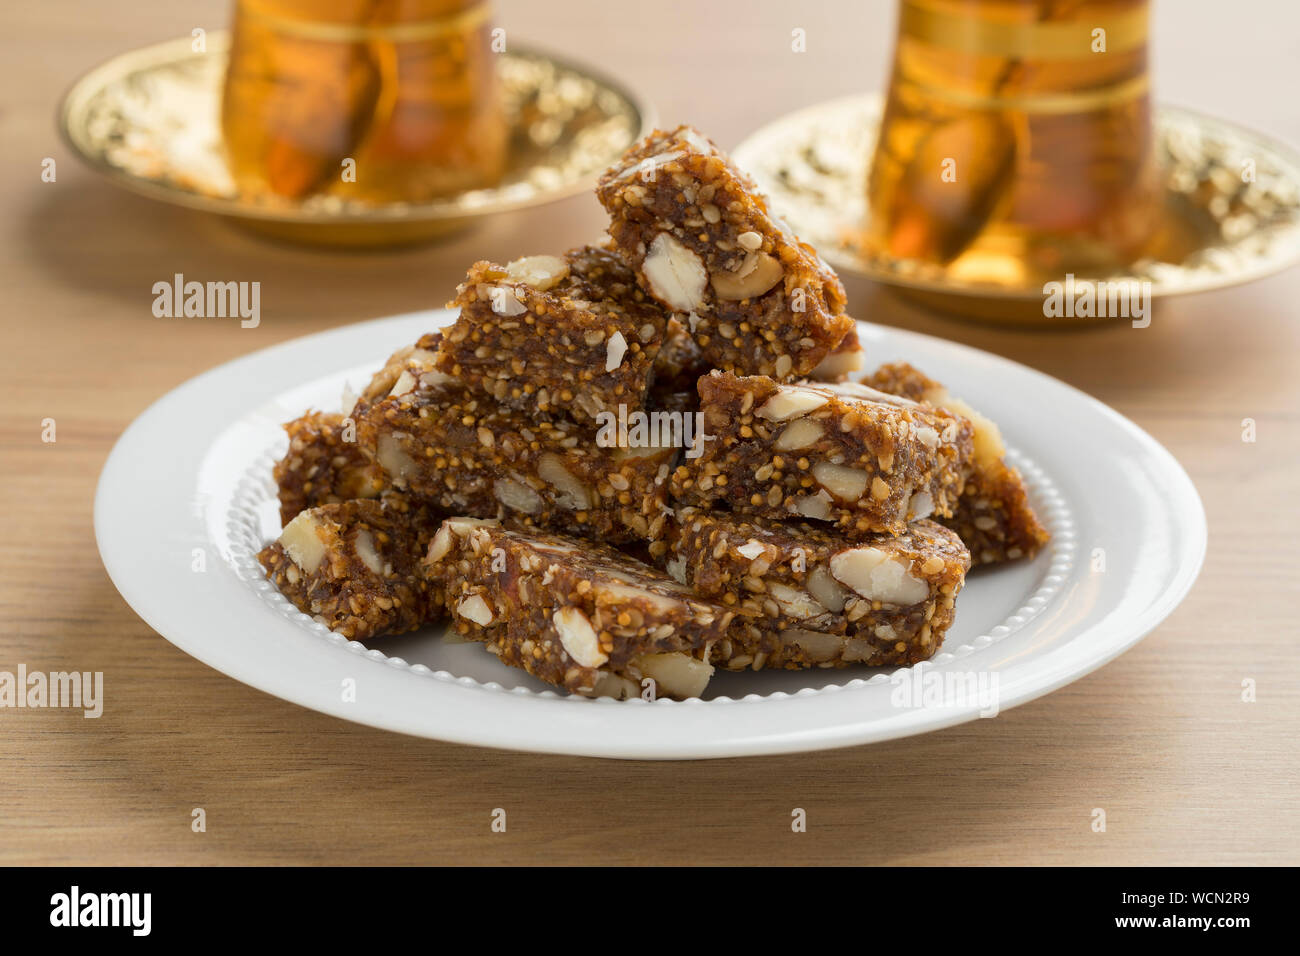 Dish with Turkish fig, fruit and nut cake pieces served with traditional tea Stock Photo